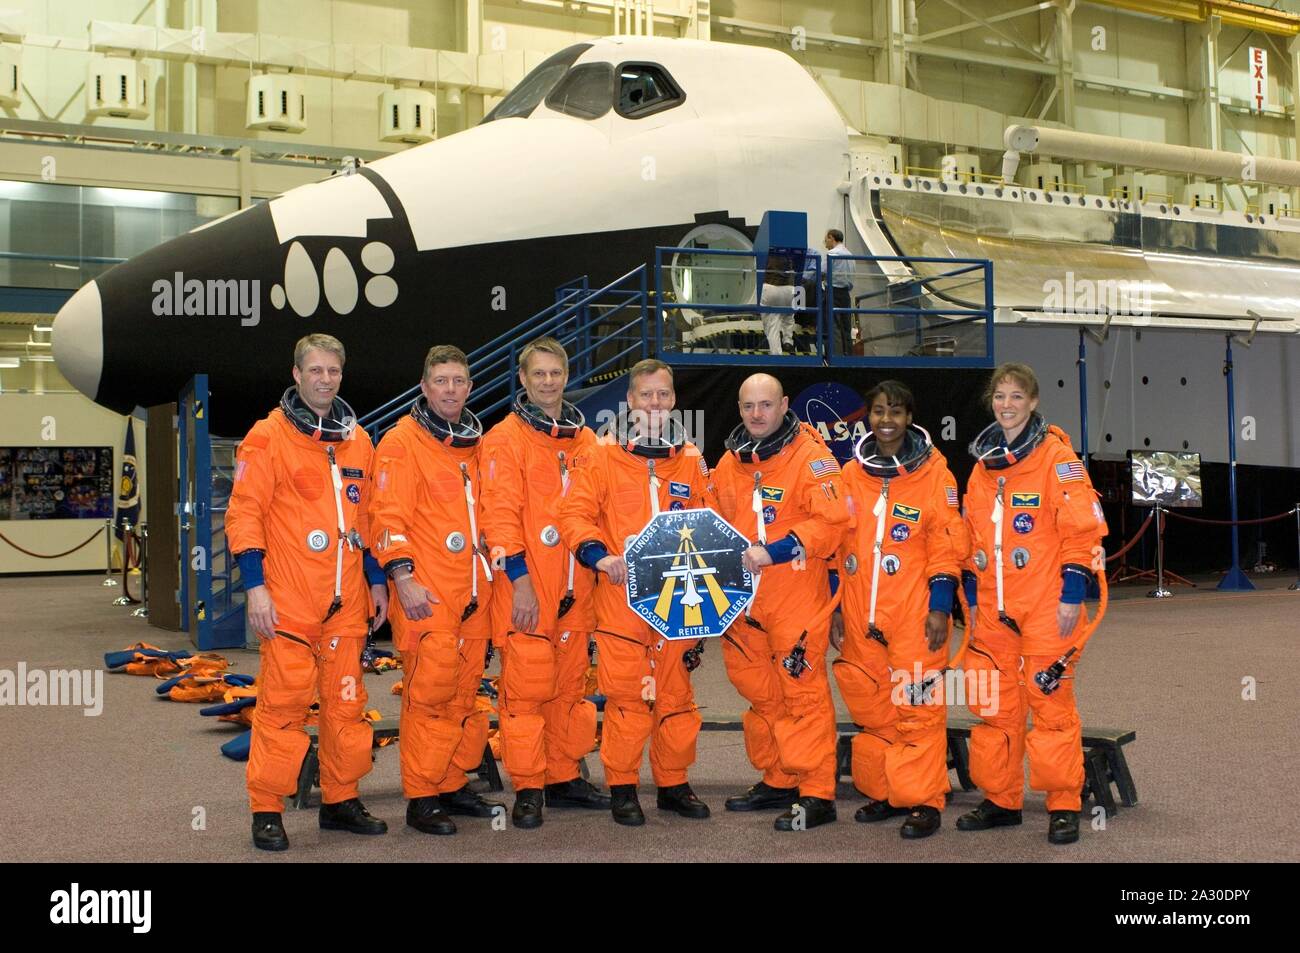 Houston, Texas, USA. 21st Mar, 2006. FILE: In this photo released by NASA, The crew members assigned to STS-121 take a break from training for a group shot in the Johnson Space Center's Space Vehicle Mockup Facility in Houston, Texas on March 21, 2006. From the left are astronauts Thomas Reiter of the European Space Agency, Michael E. Fossum, Piers J. Sellers, Steven W. Lindsey, Mark E. Kelly, Stephanie D. Wilson and Lisa M. Nowak. Lindsey is mission commander and Kelly is pilot, with the other five serving as mission specialists. Once onboard the International Space Station, Reiter, who flew Stock Photo